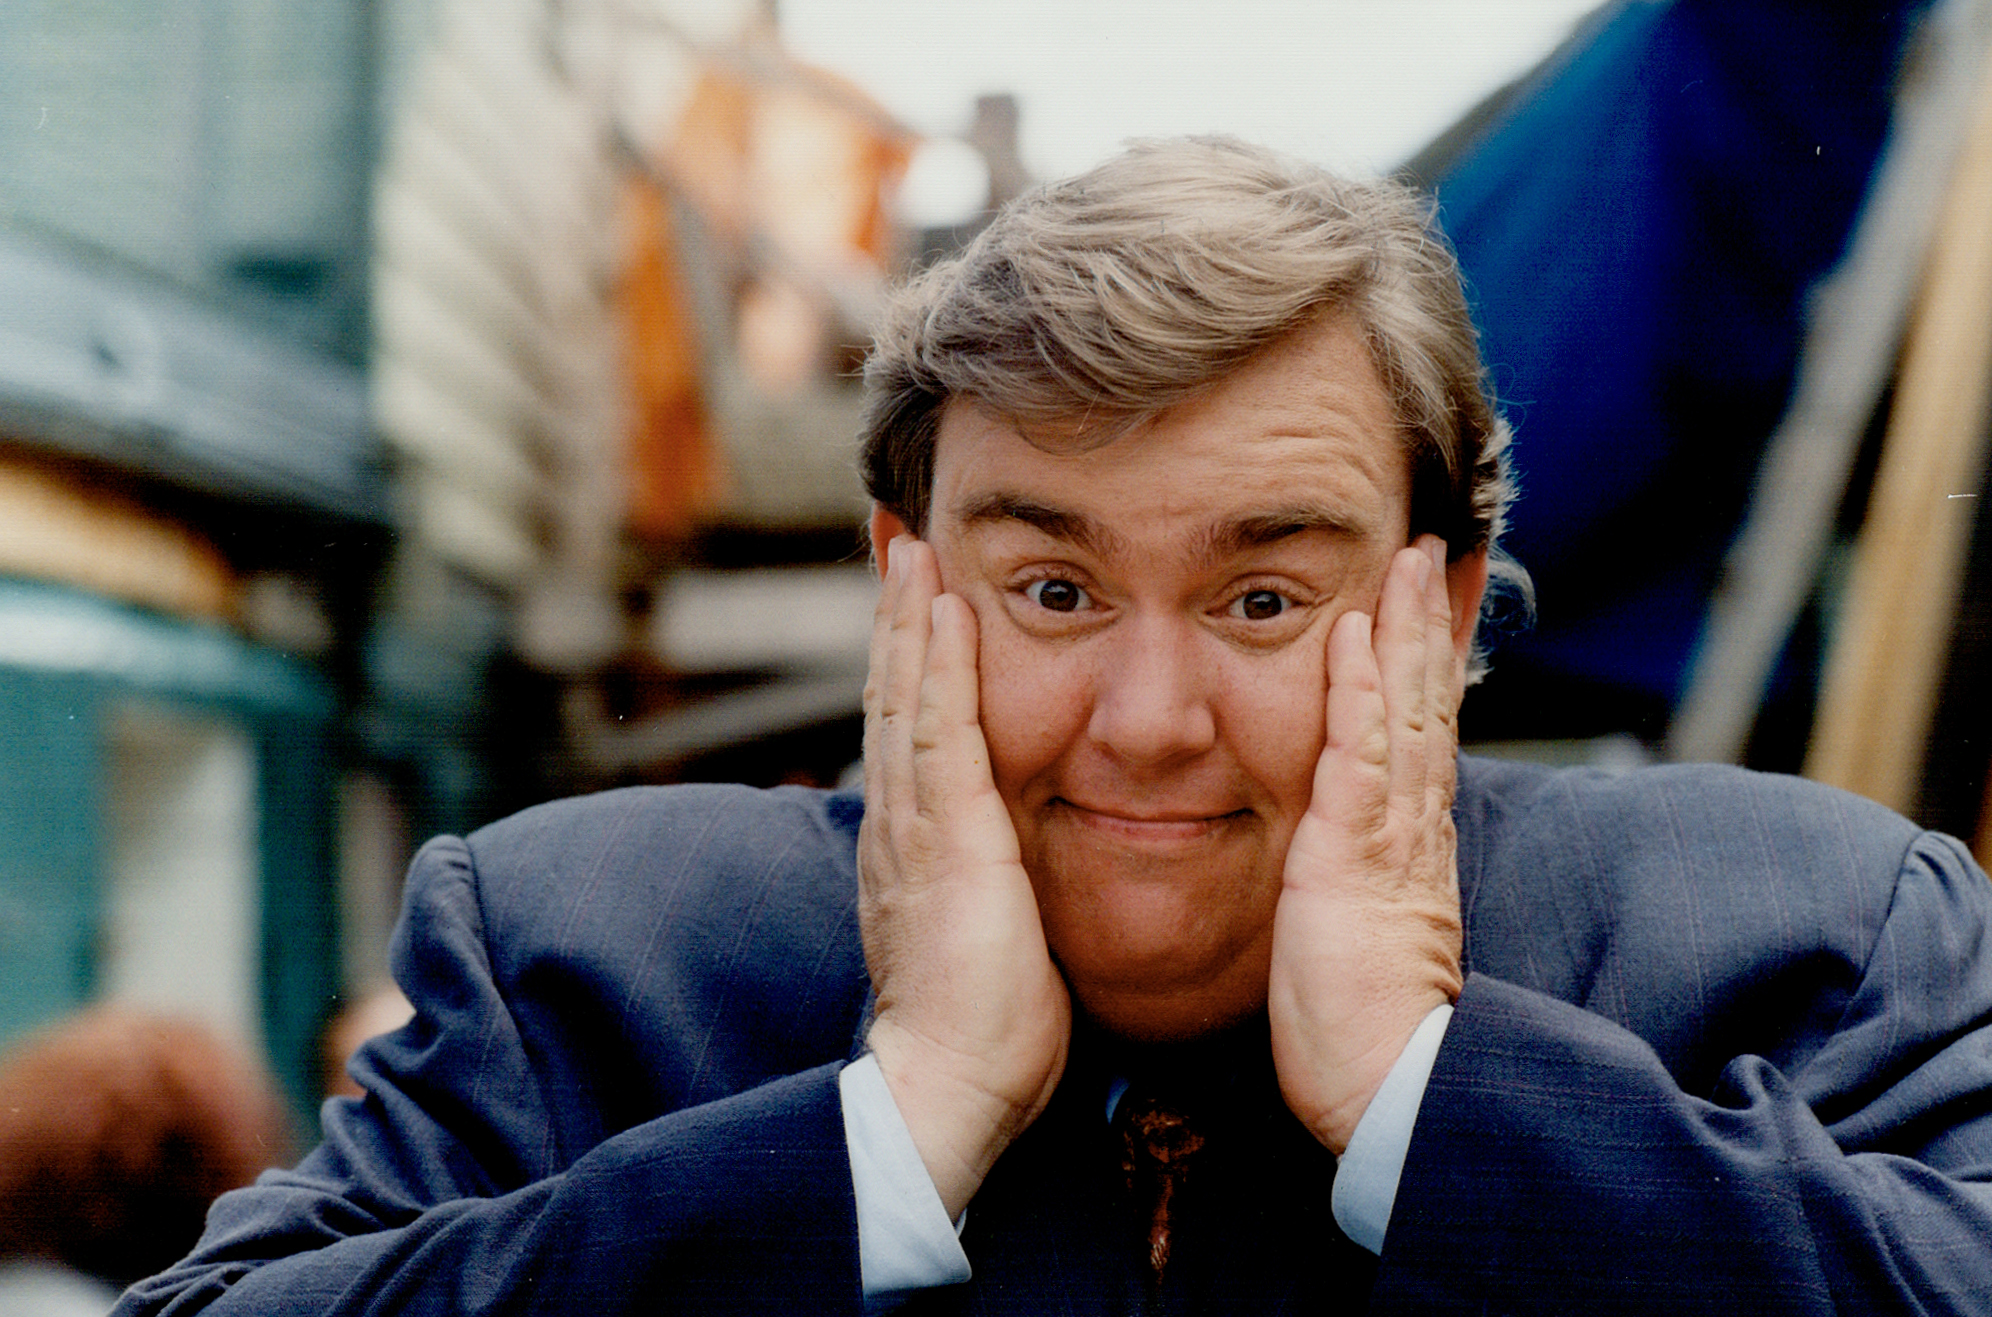 John Candy, circa 1994 | Source: Getty Images